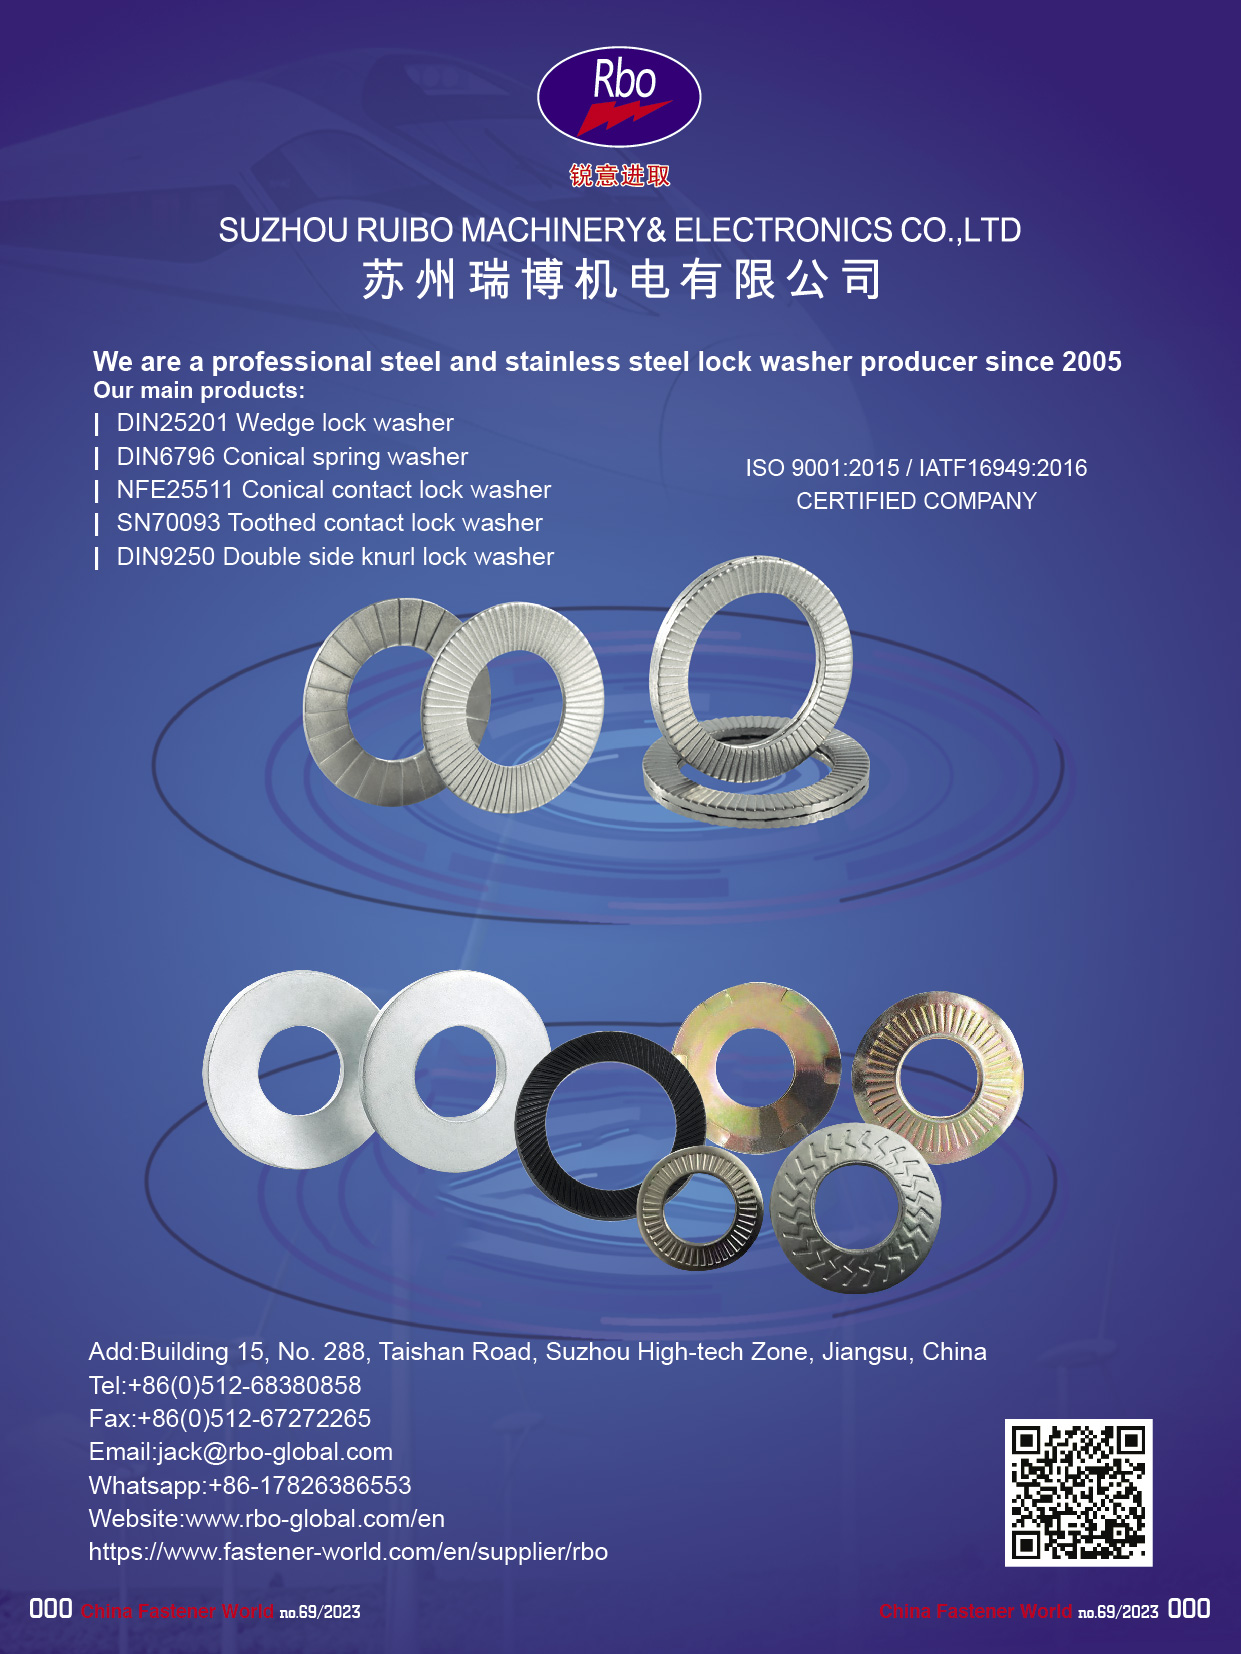 SUZHOU RUIBO MACHINERY & ELECTRONIC CO., LTD. , DIN25201 Wedge Lock Washer, DIN6796 Conical Spring Washer, NFE25511 Conical Contact Lock Washer, SN70093 Toothed Contact Lock Washer, DIN9250 Double Side Knurl Lock Washer